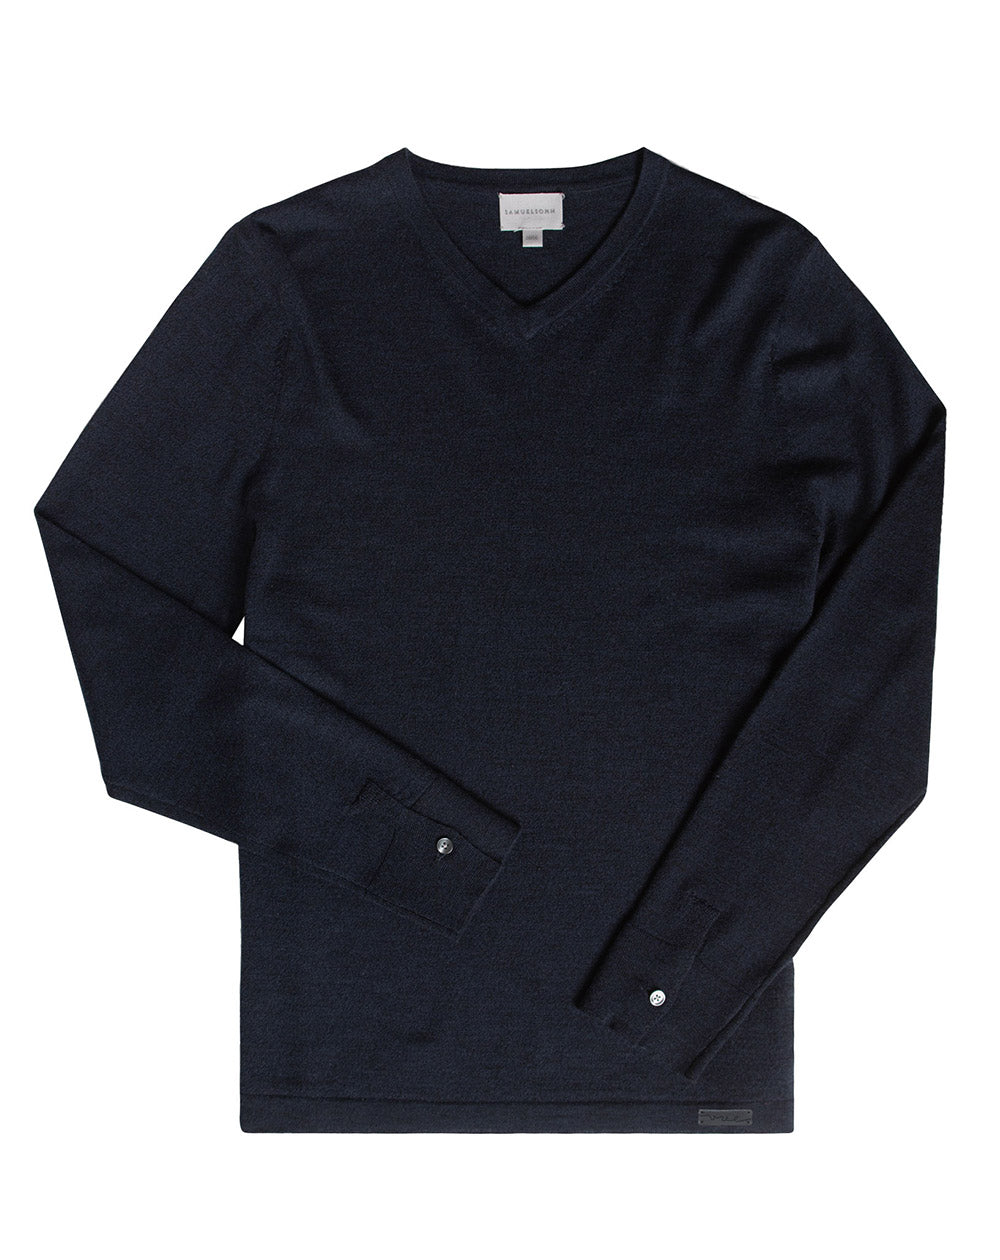 Navy Extrafine Merino V-Neck Sweater This Australian Extrafine Merino is a super premium wool used in the highest quality knits. A lightweight wool that is versatile under a jacket or worn alone, the perfect knit for the season. 